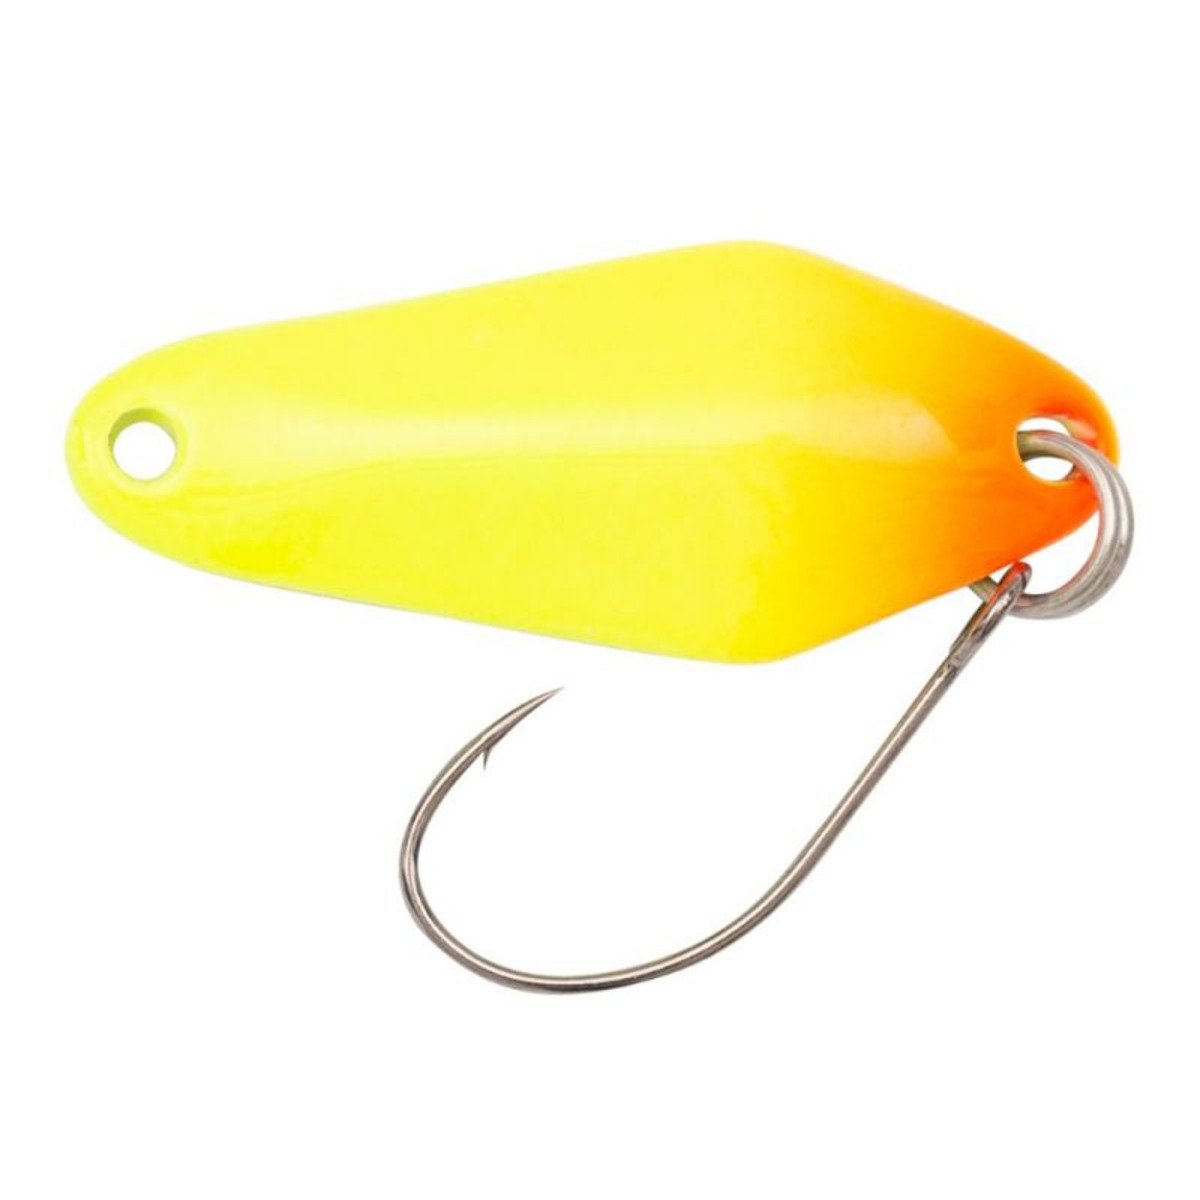 Berkley Area Game Spoons Chisai - 2.8 g - 2.87 cm - Orange Tip-Chartreuse-Gold